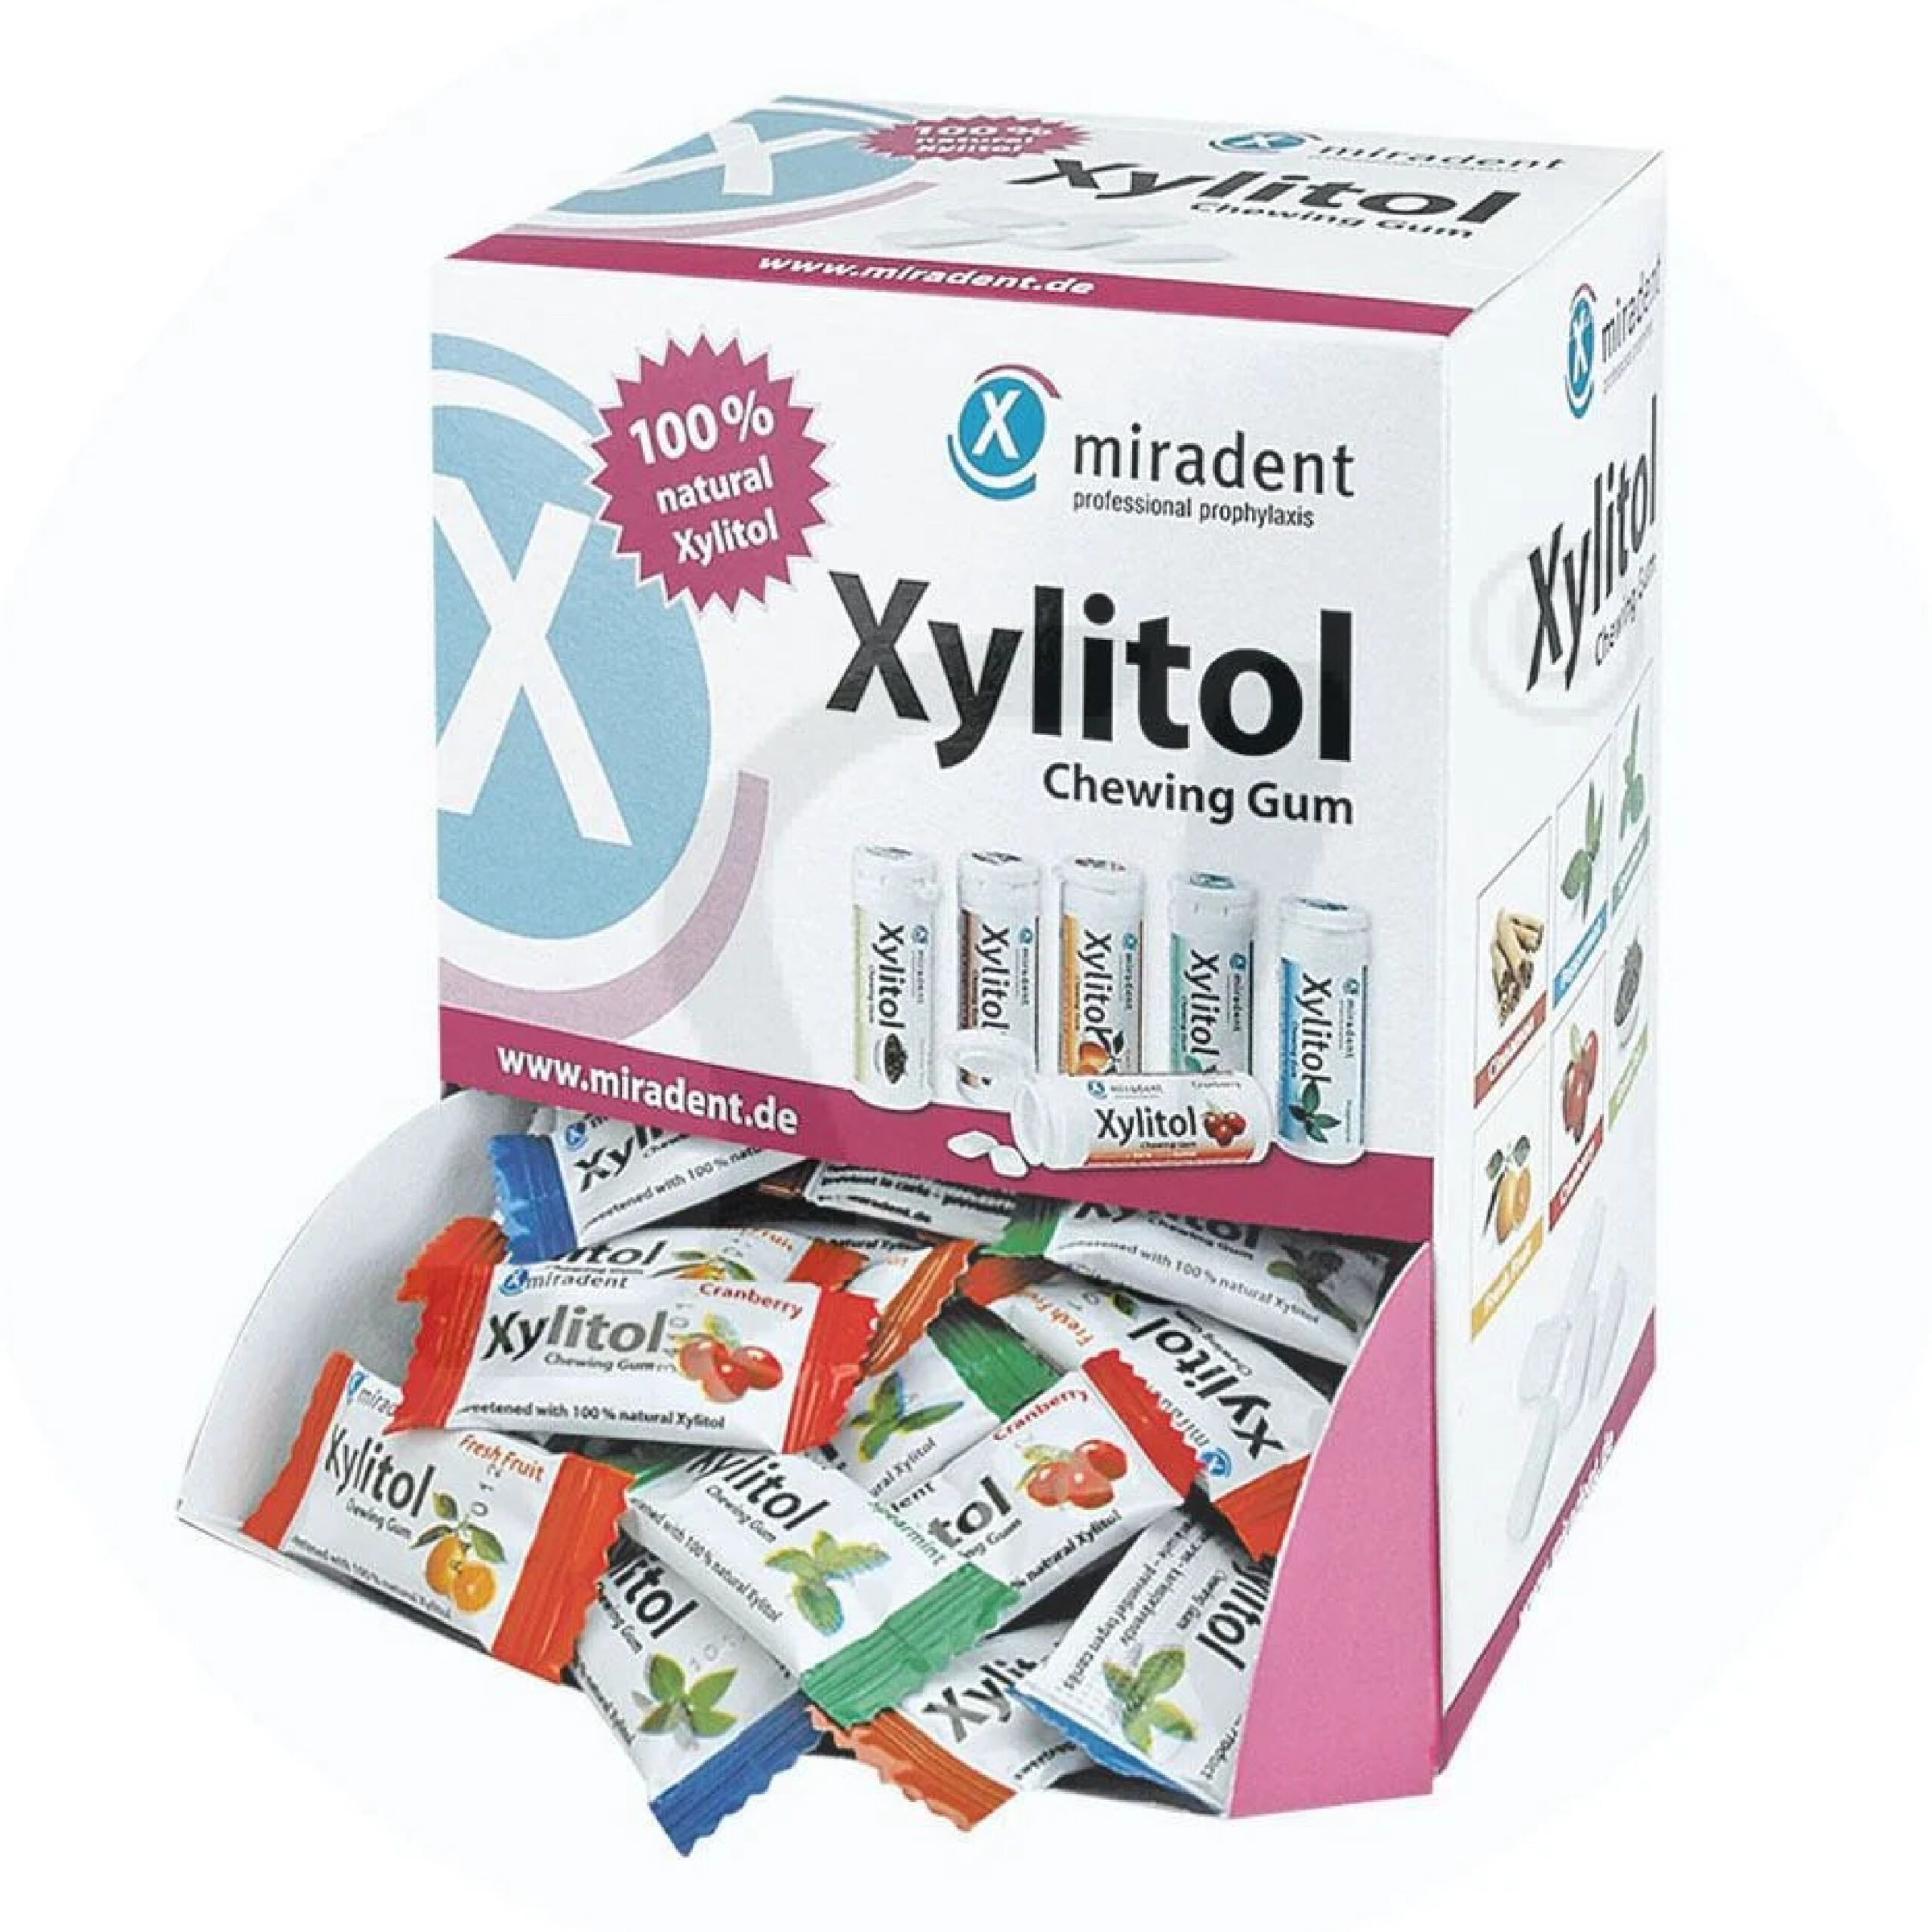 HW635069 Xylitol Chewing GUM 200 1 scaled